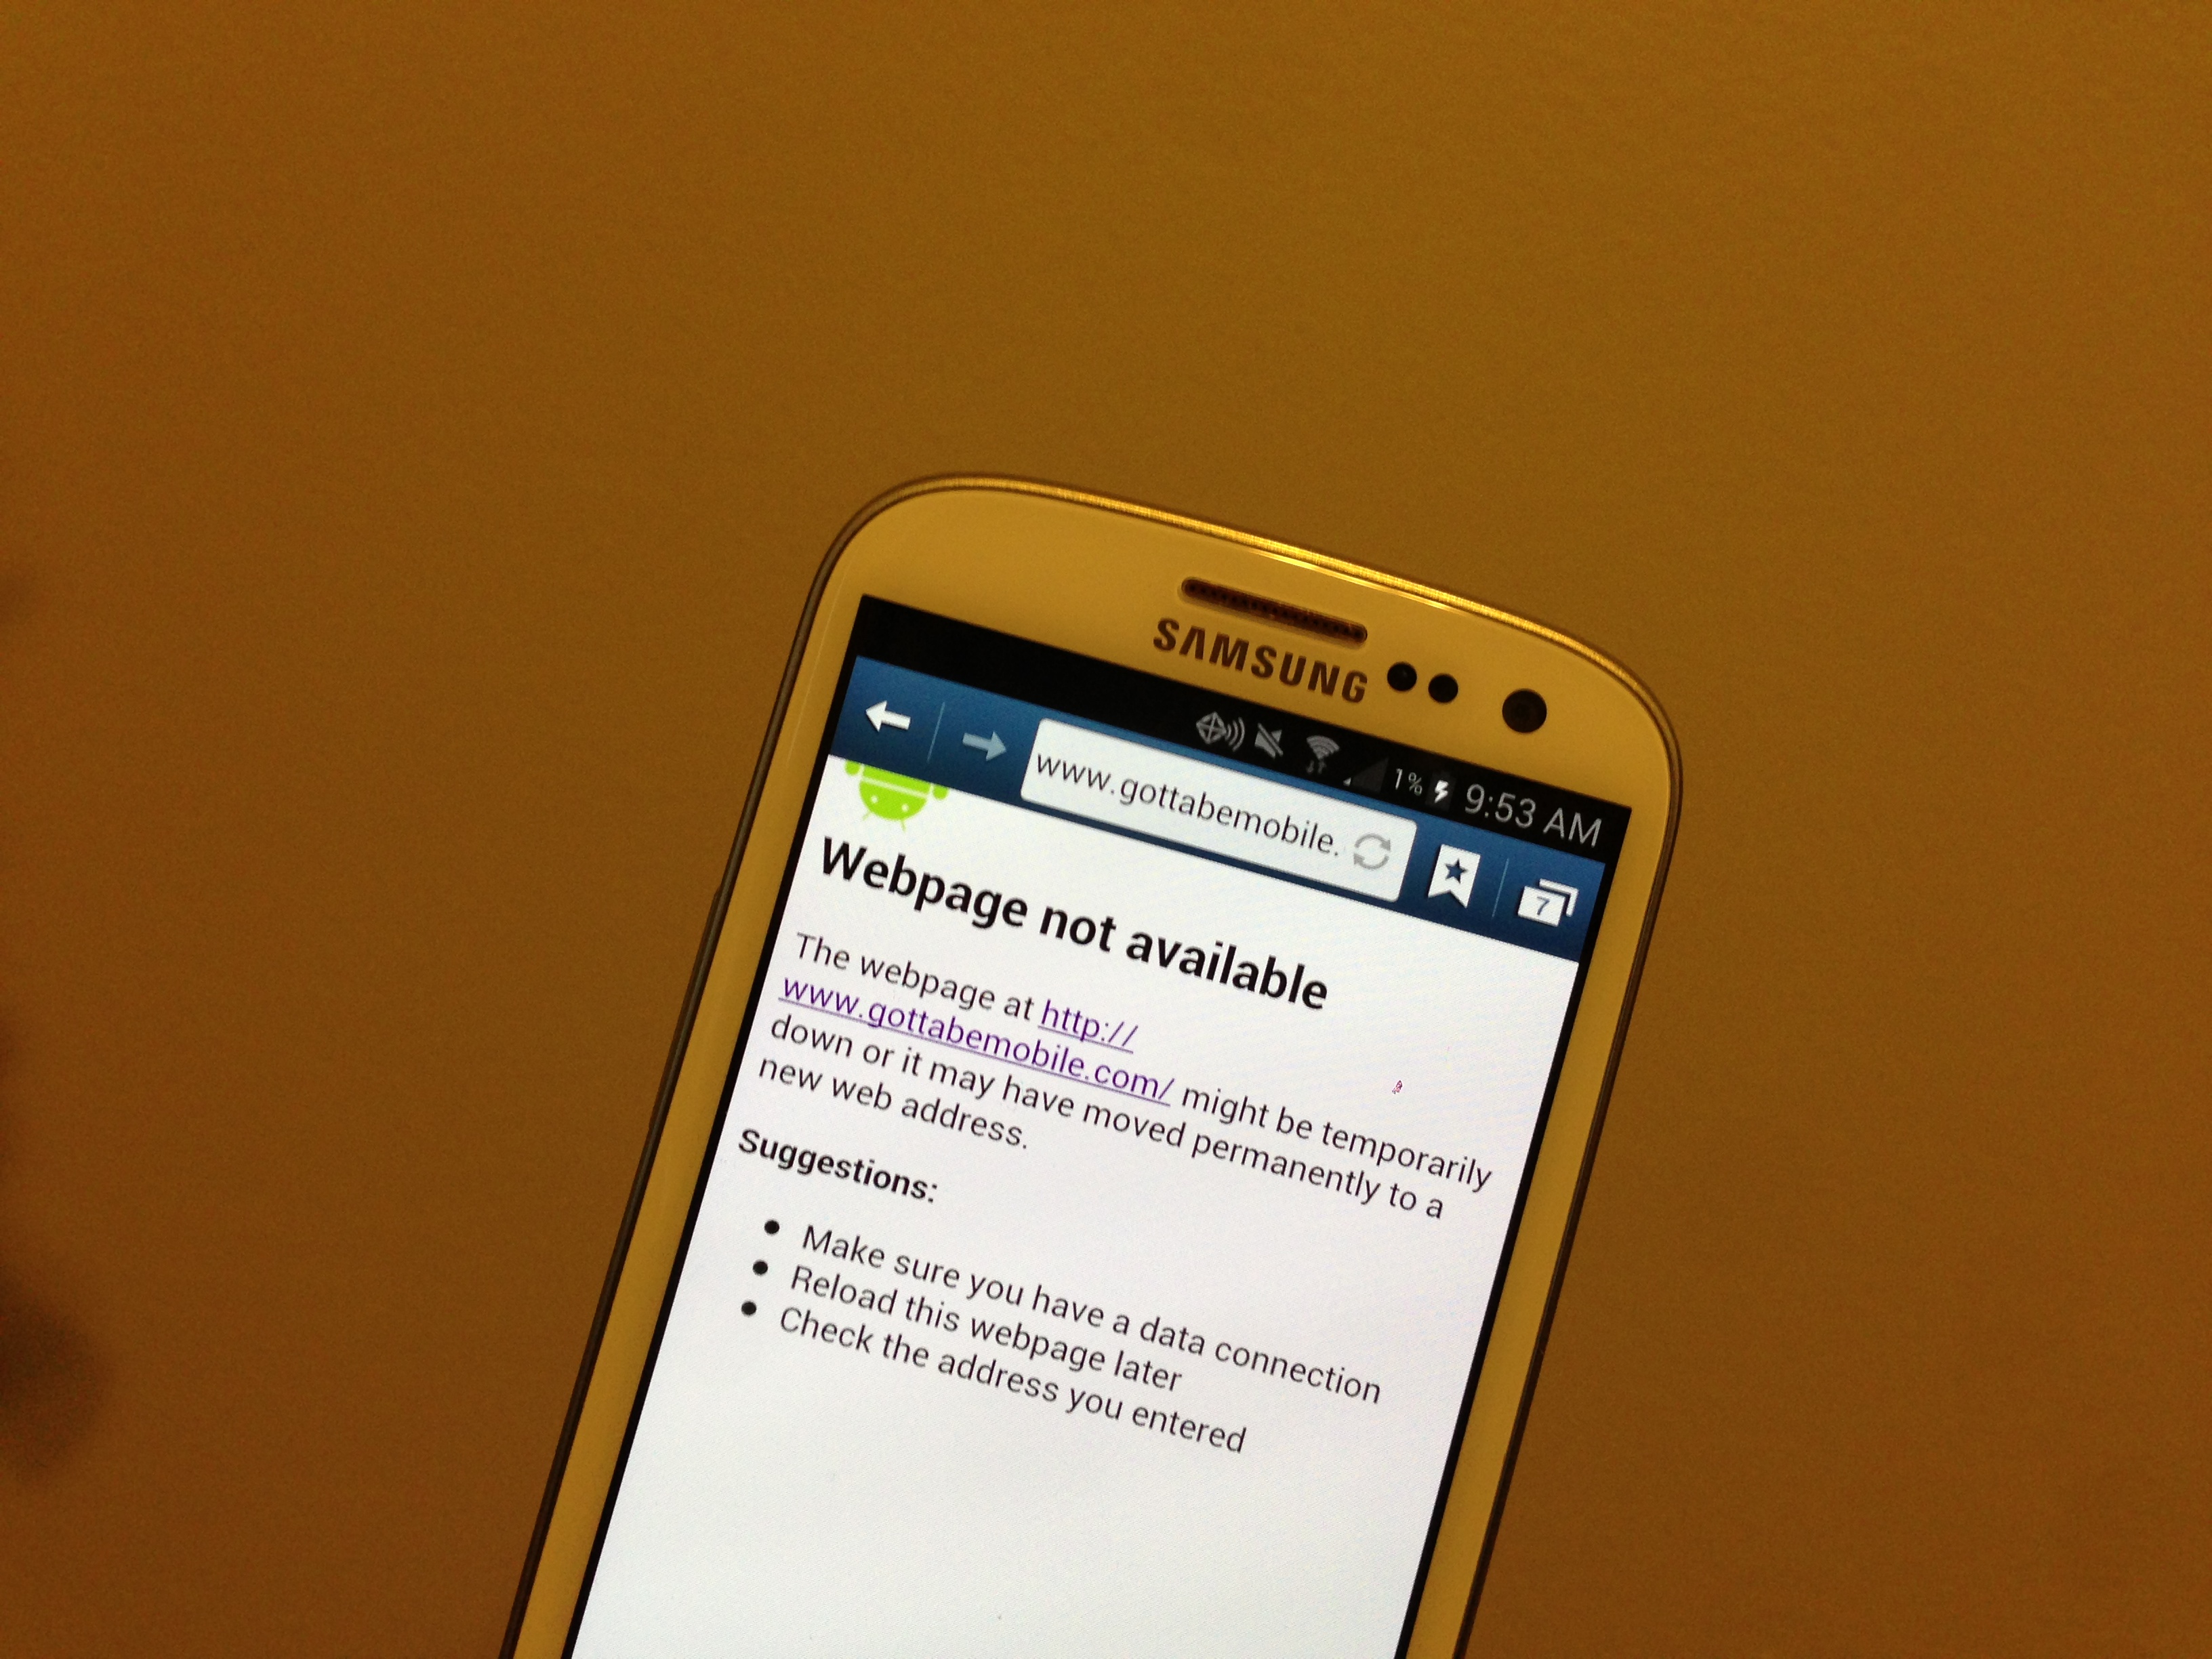 The Samsung Galaxy S3 uses 3.5 times as much data on certain websites according to a new report.